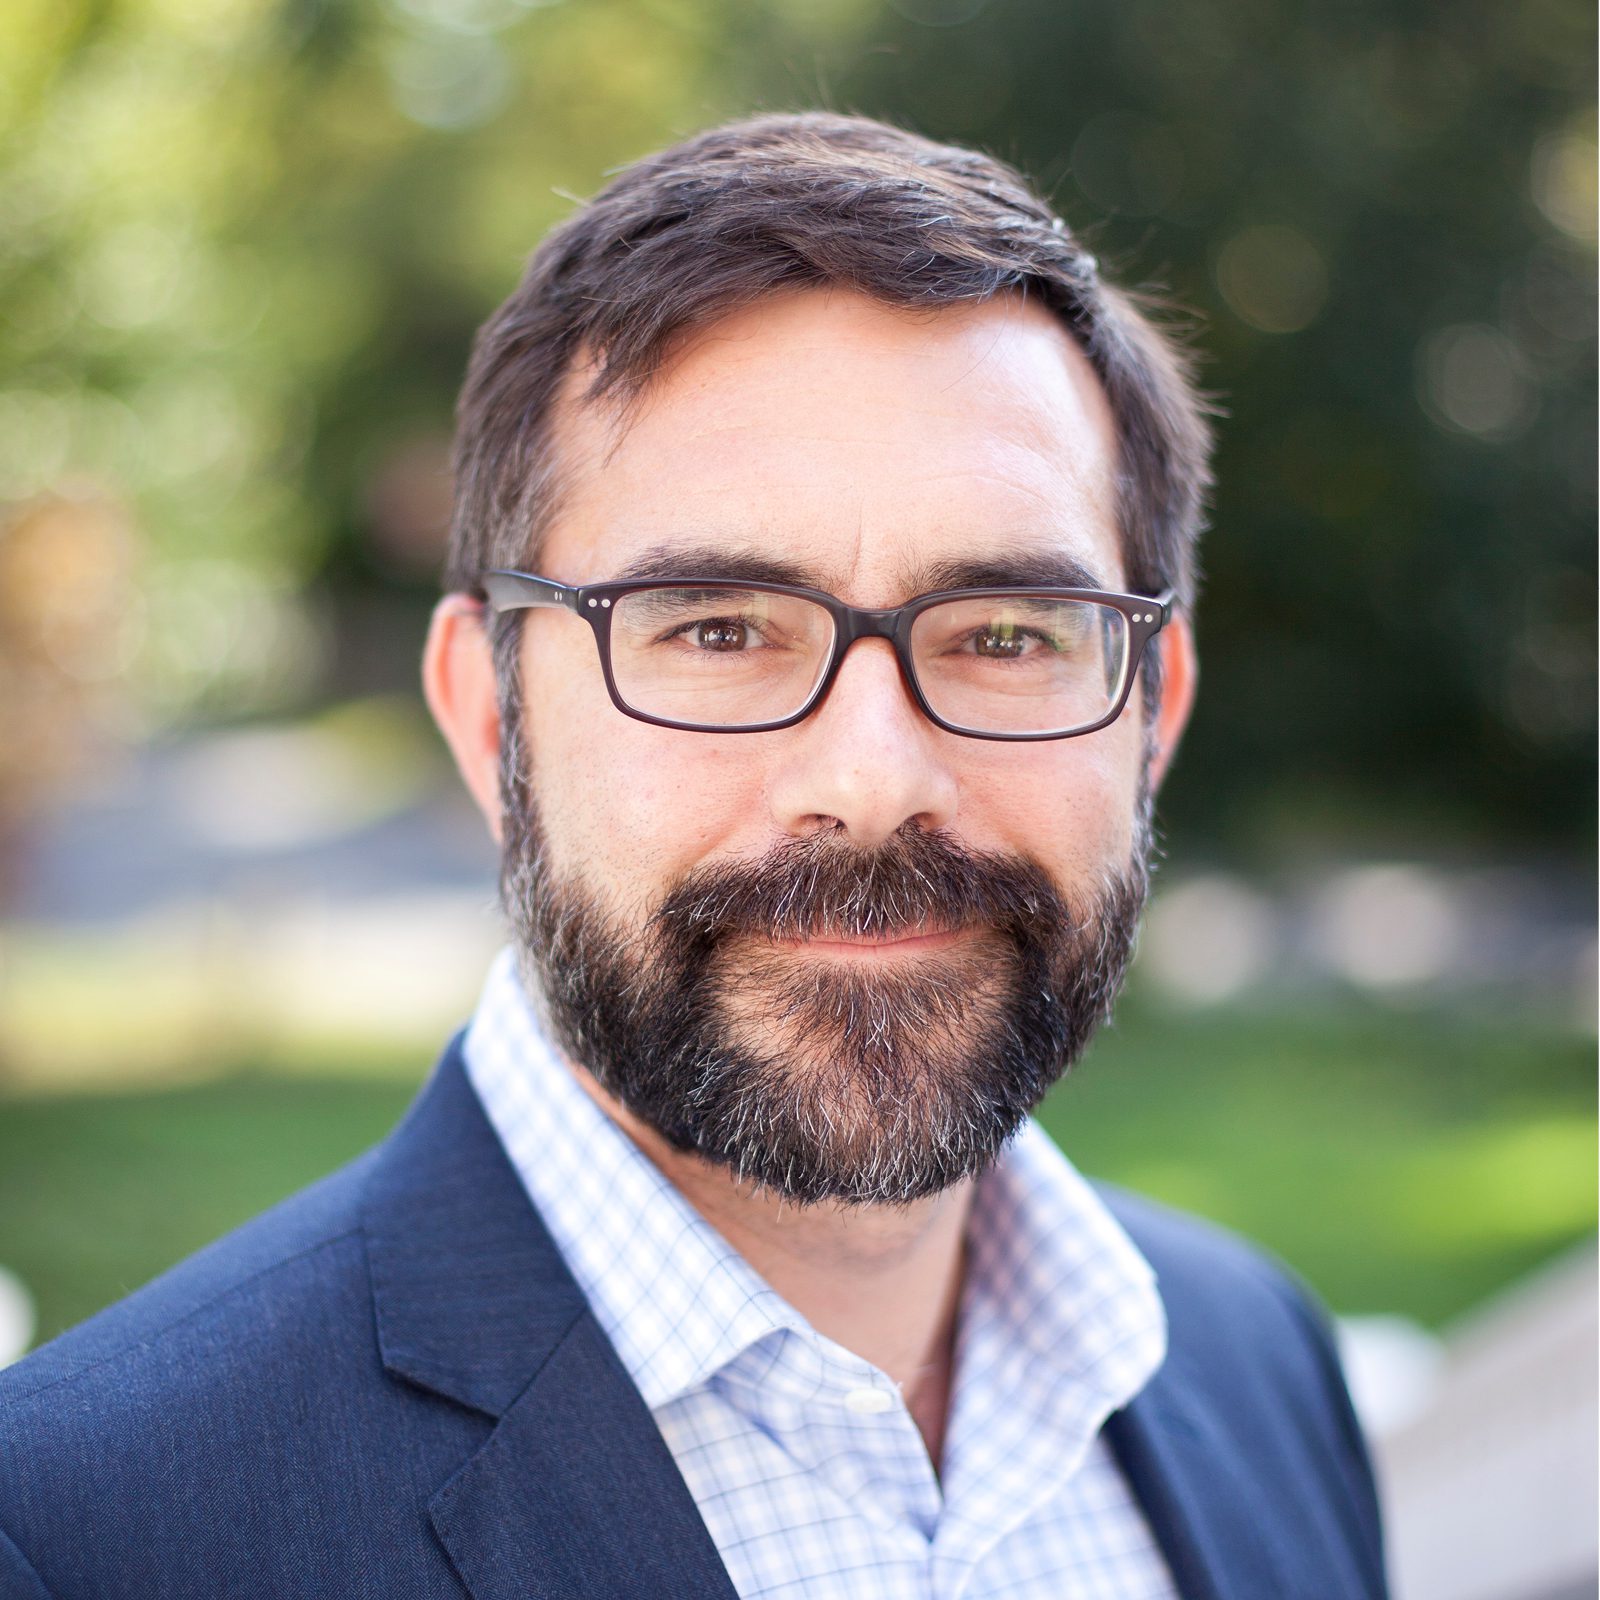 Belmont University Appoints Sociologist, Social and Nonprofit Leader Dr. Josh Yates to New Institutional Role Belmont University & Media